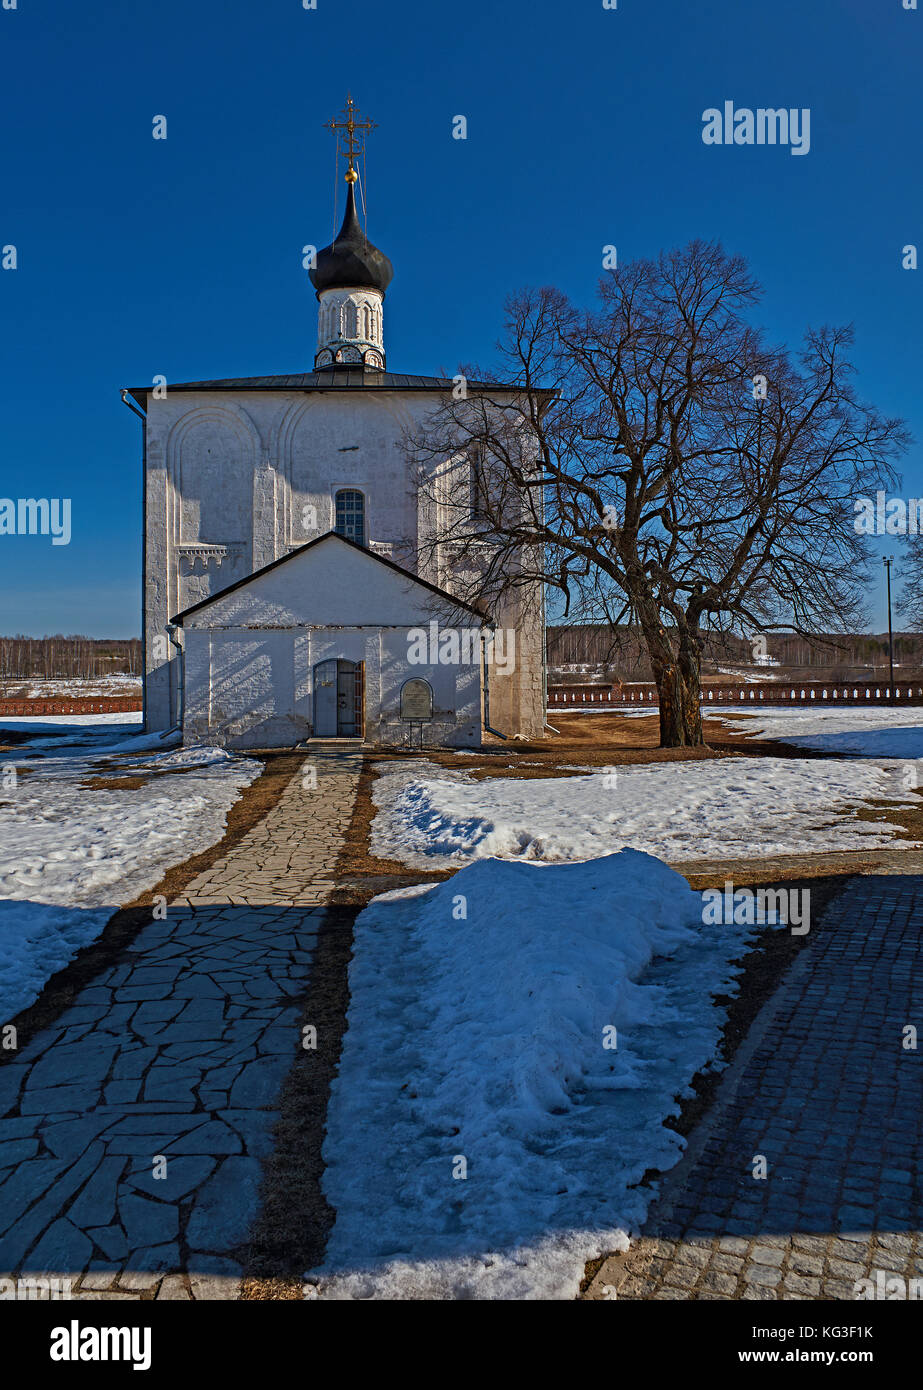 Ancient Orthodox Church.City landscape of Suzdal. Vintage stone orthodox temple of the founder of Moscow Yuri Dolgoruky.Suzdal.Golden Ring of Russia Stock Photo